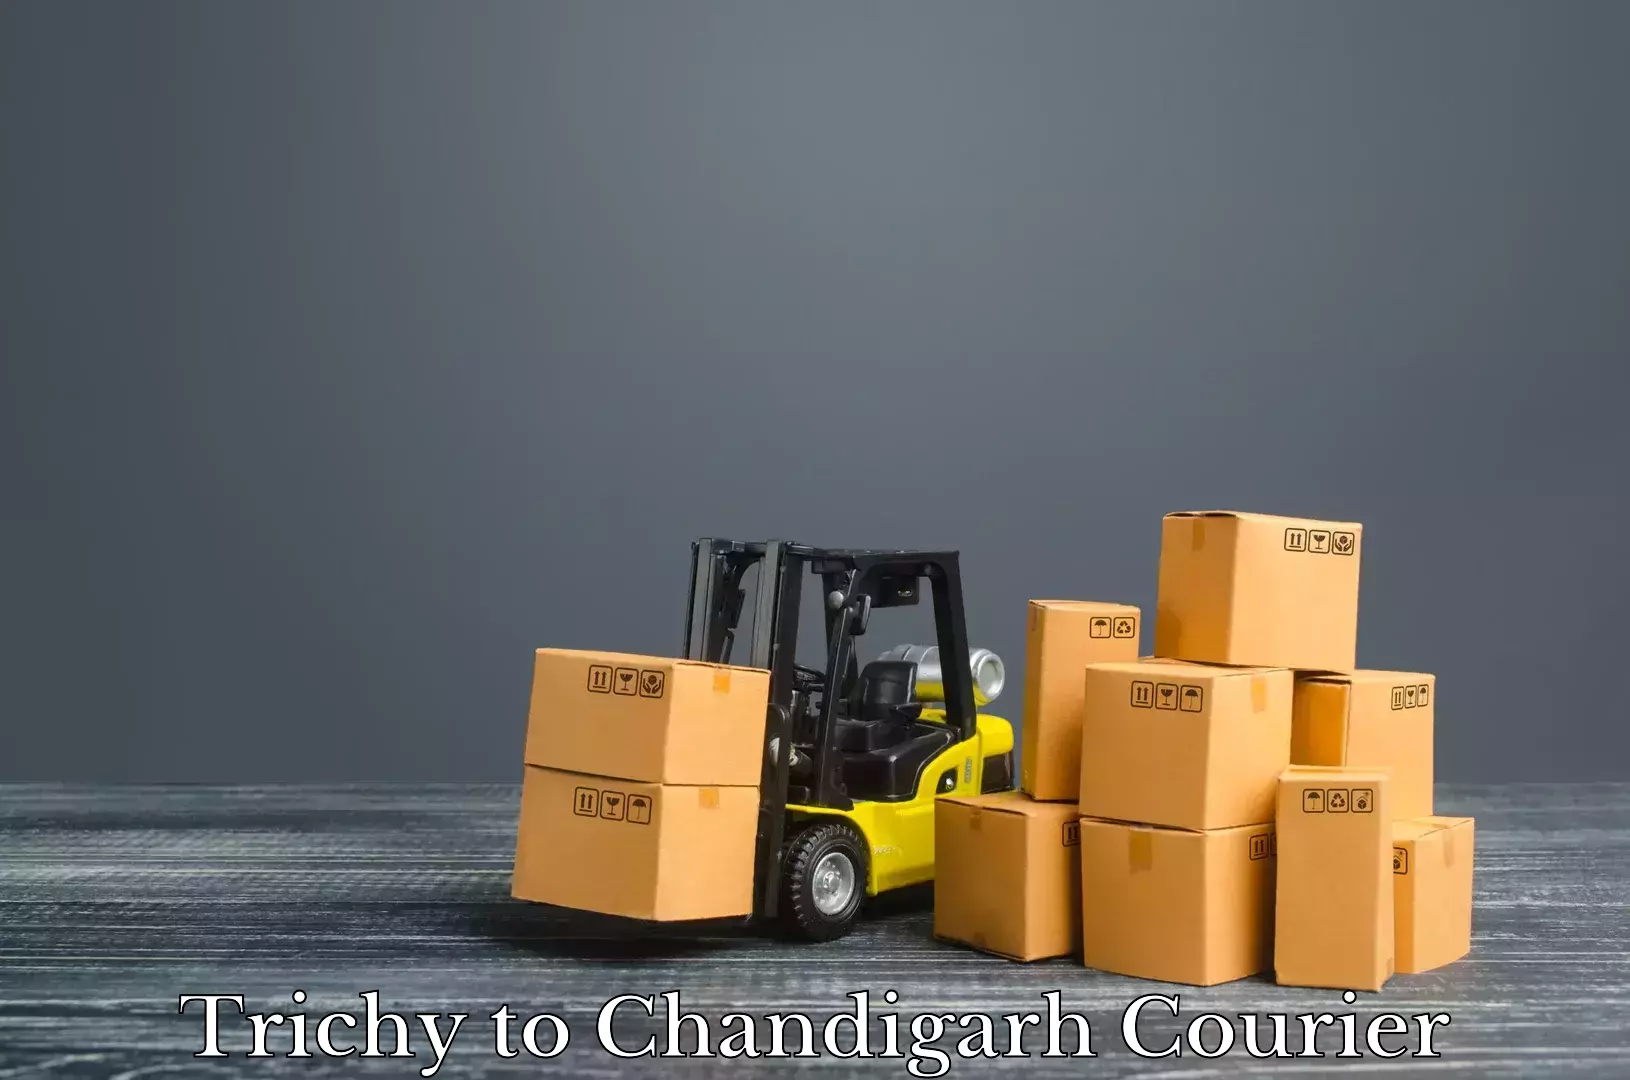 Luggage shipment specialists Trichy to Chandigarh